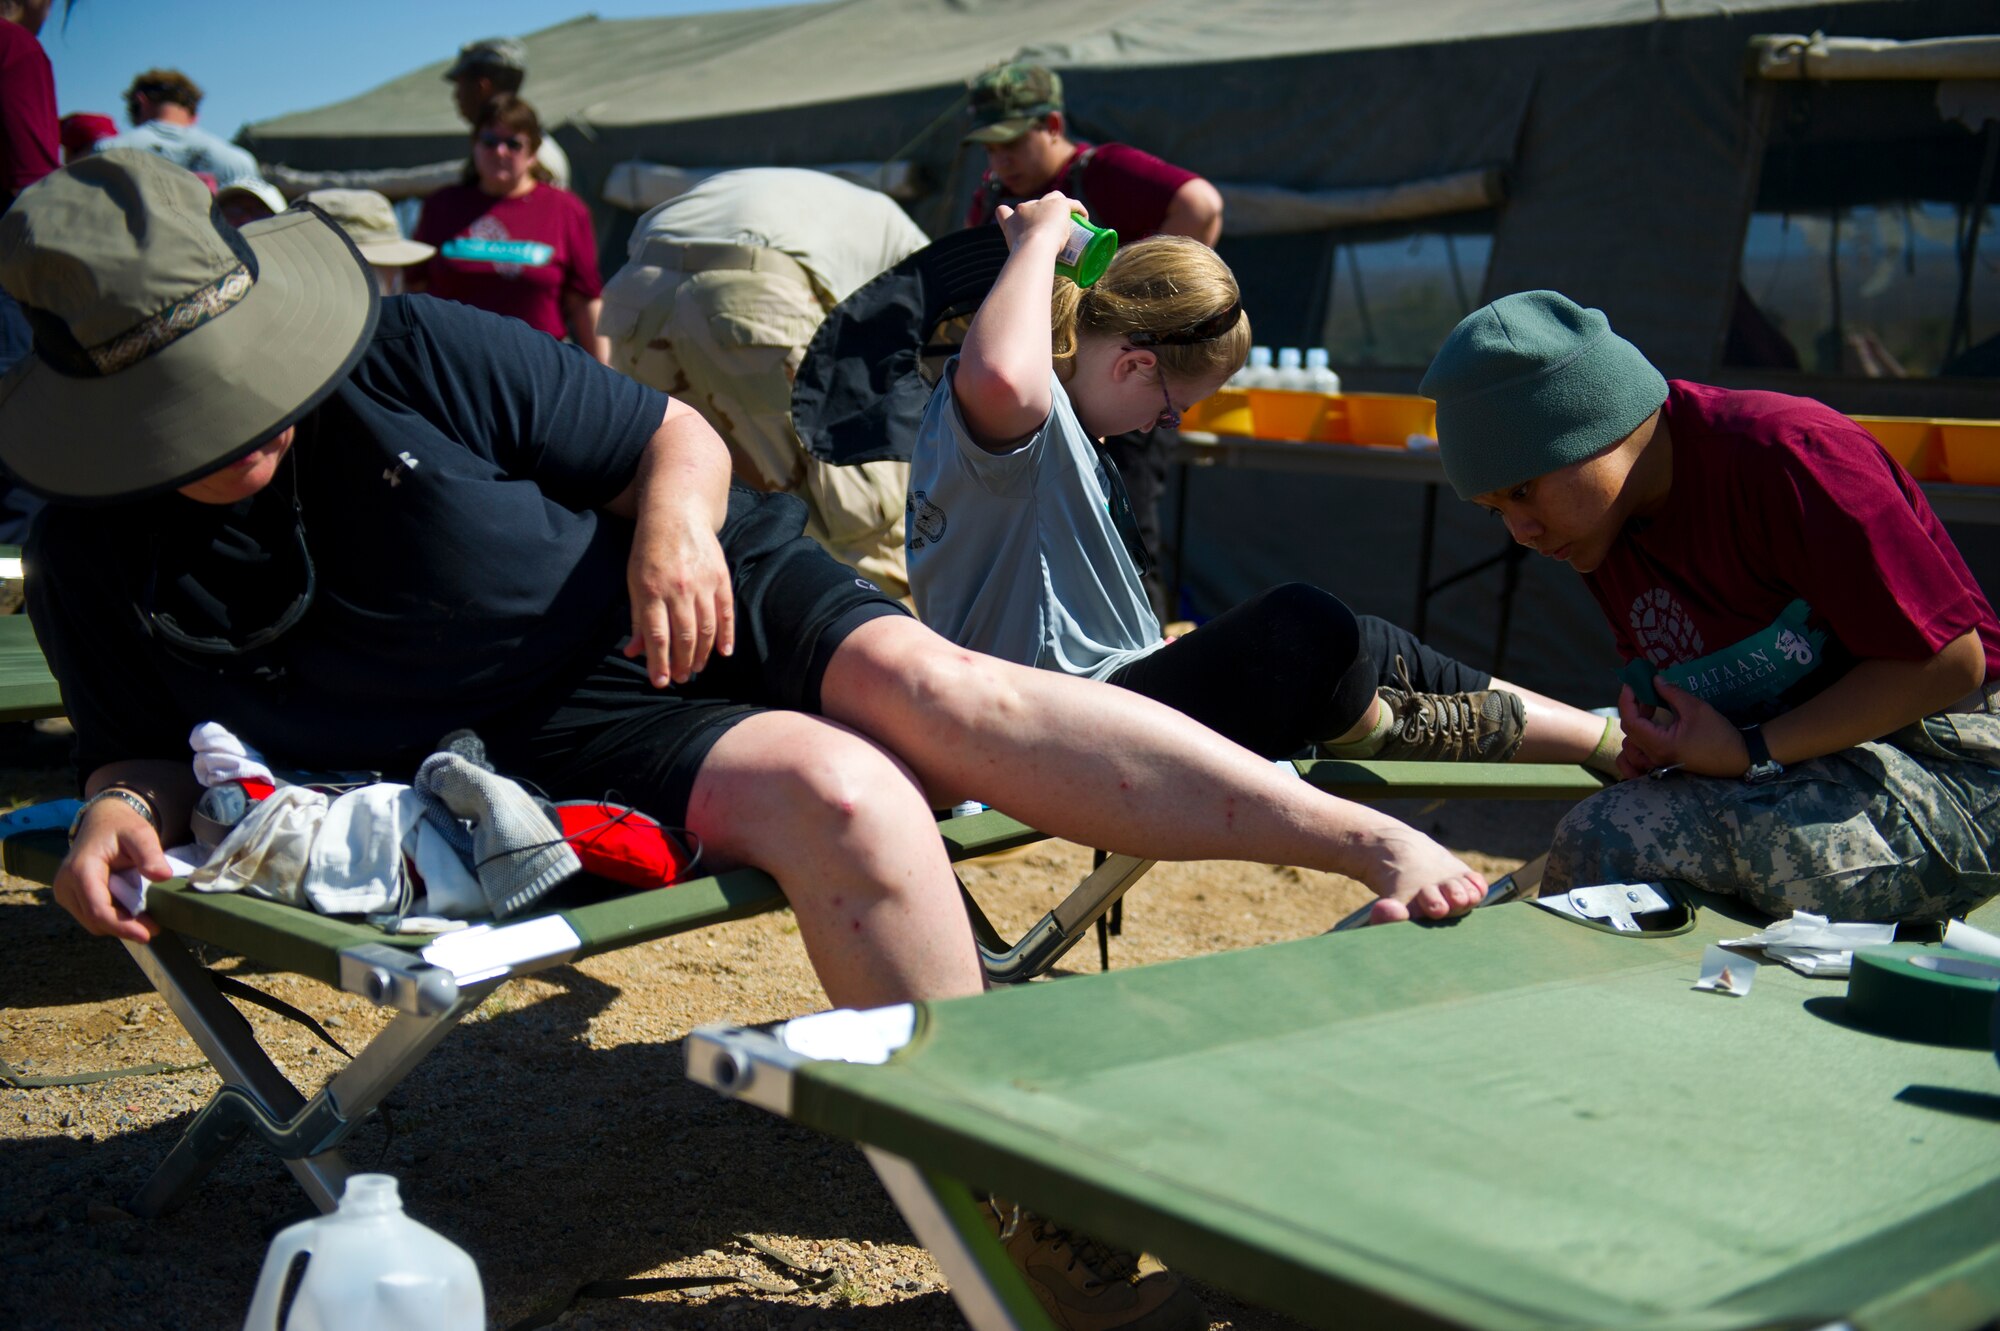 WHITE SANDS MISSILE RANGE, N.M. – Sherri Rowe, a participant in the Bataan Memorial Death March, receives medical treatment for blisters at a rest stop along the course here March 25. Many participants suffered minor injuries, such as blisters and cramps, along the course. Volunteer medics were on hand to assist at all times. (U.S. Air Force photo by Airman 1st Class Daniel E. Liddicoet/Released)